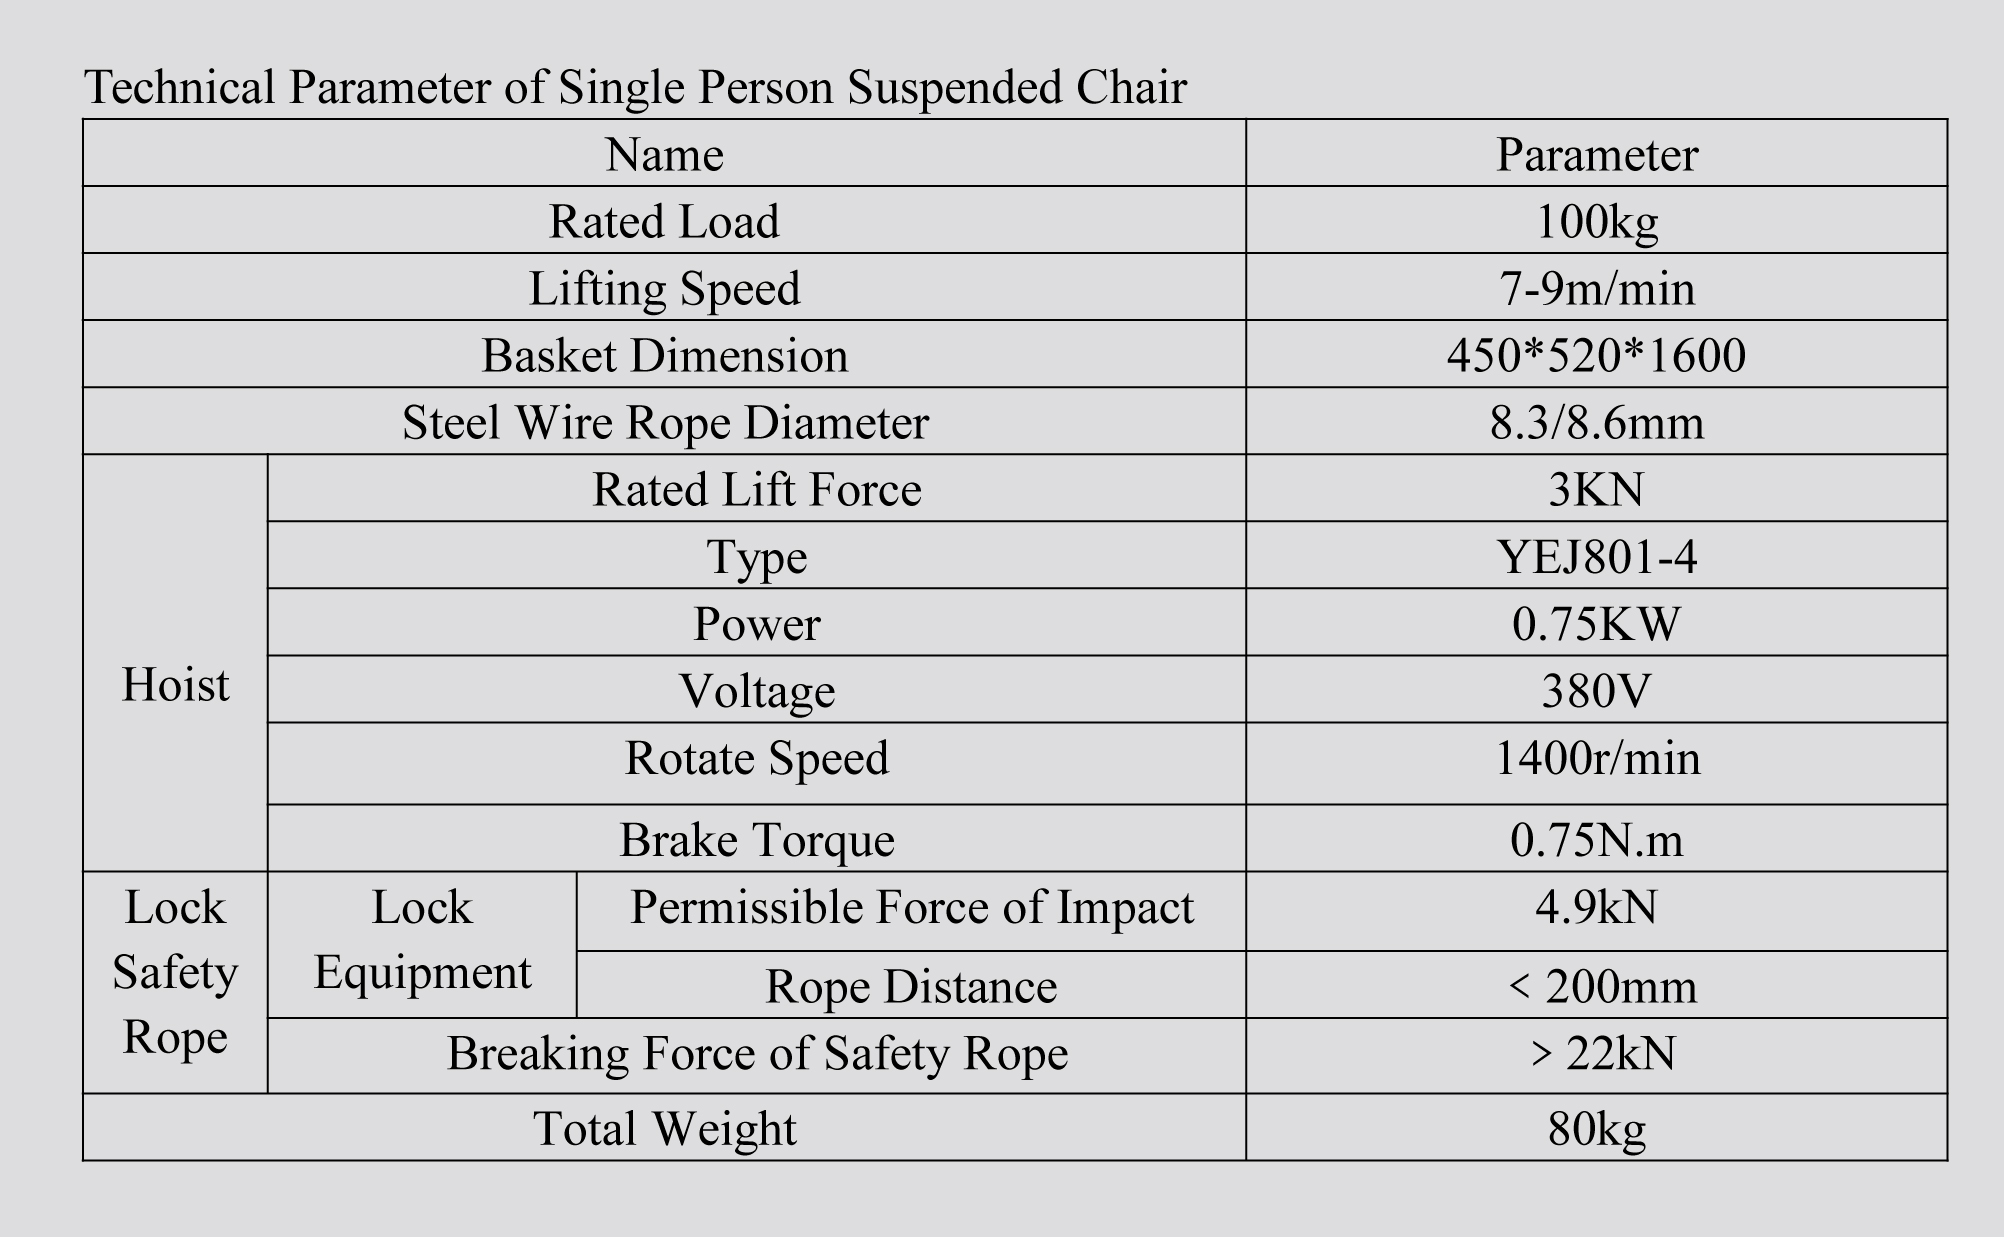 Technical Parameter of Single Person Suspended Chair